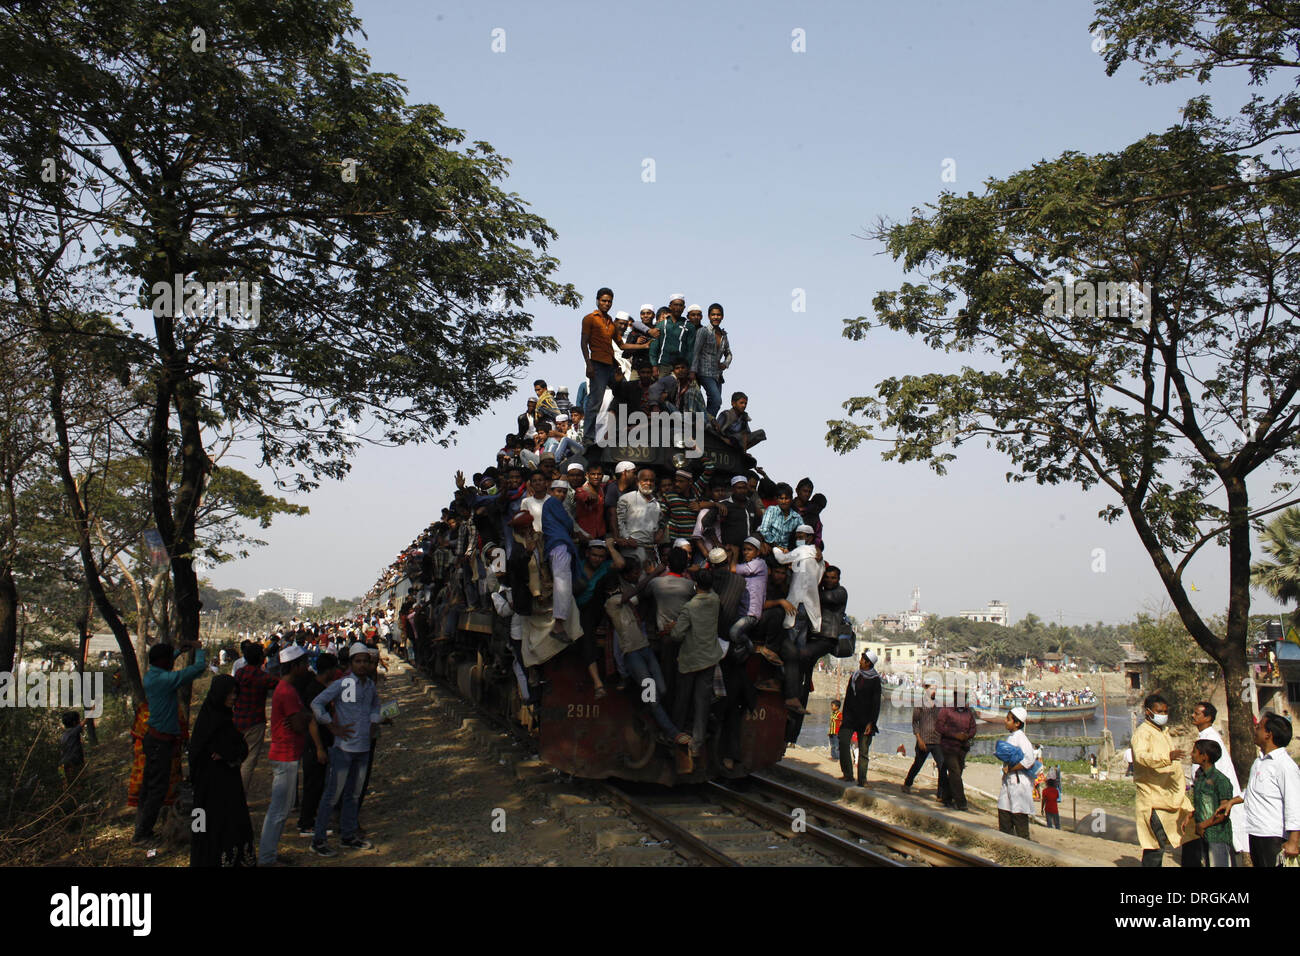 Dhaka,Bangladesh. 26th Jan, 2014. Bangladeshi Muslim devotees board a train after attending the Akheri Munajat concluding prayers on the third day of Biswa Ijtema, the second largest Muslim congregation after the Hajj at Tongi with more than two million Muslims. The Biswa Ijtema, the world’s second largest religious gathering of Muslims concluded with the prayer of Akheri Munajat on the bank of river Turag. The event focuses on prayers and meditation and does not allow political discussion.  Thousands of Muslims joined the prayer at the Biswa Ijtema grounds and surrounding areas. Stock Photo